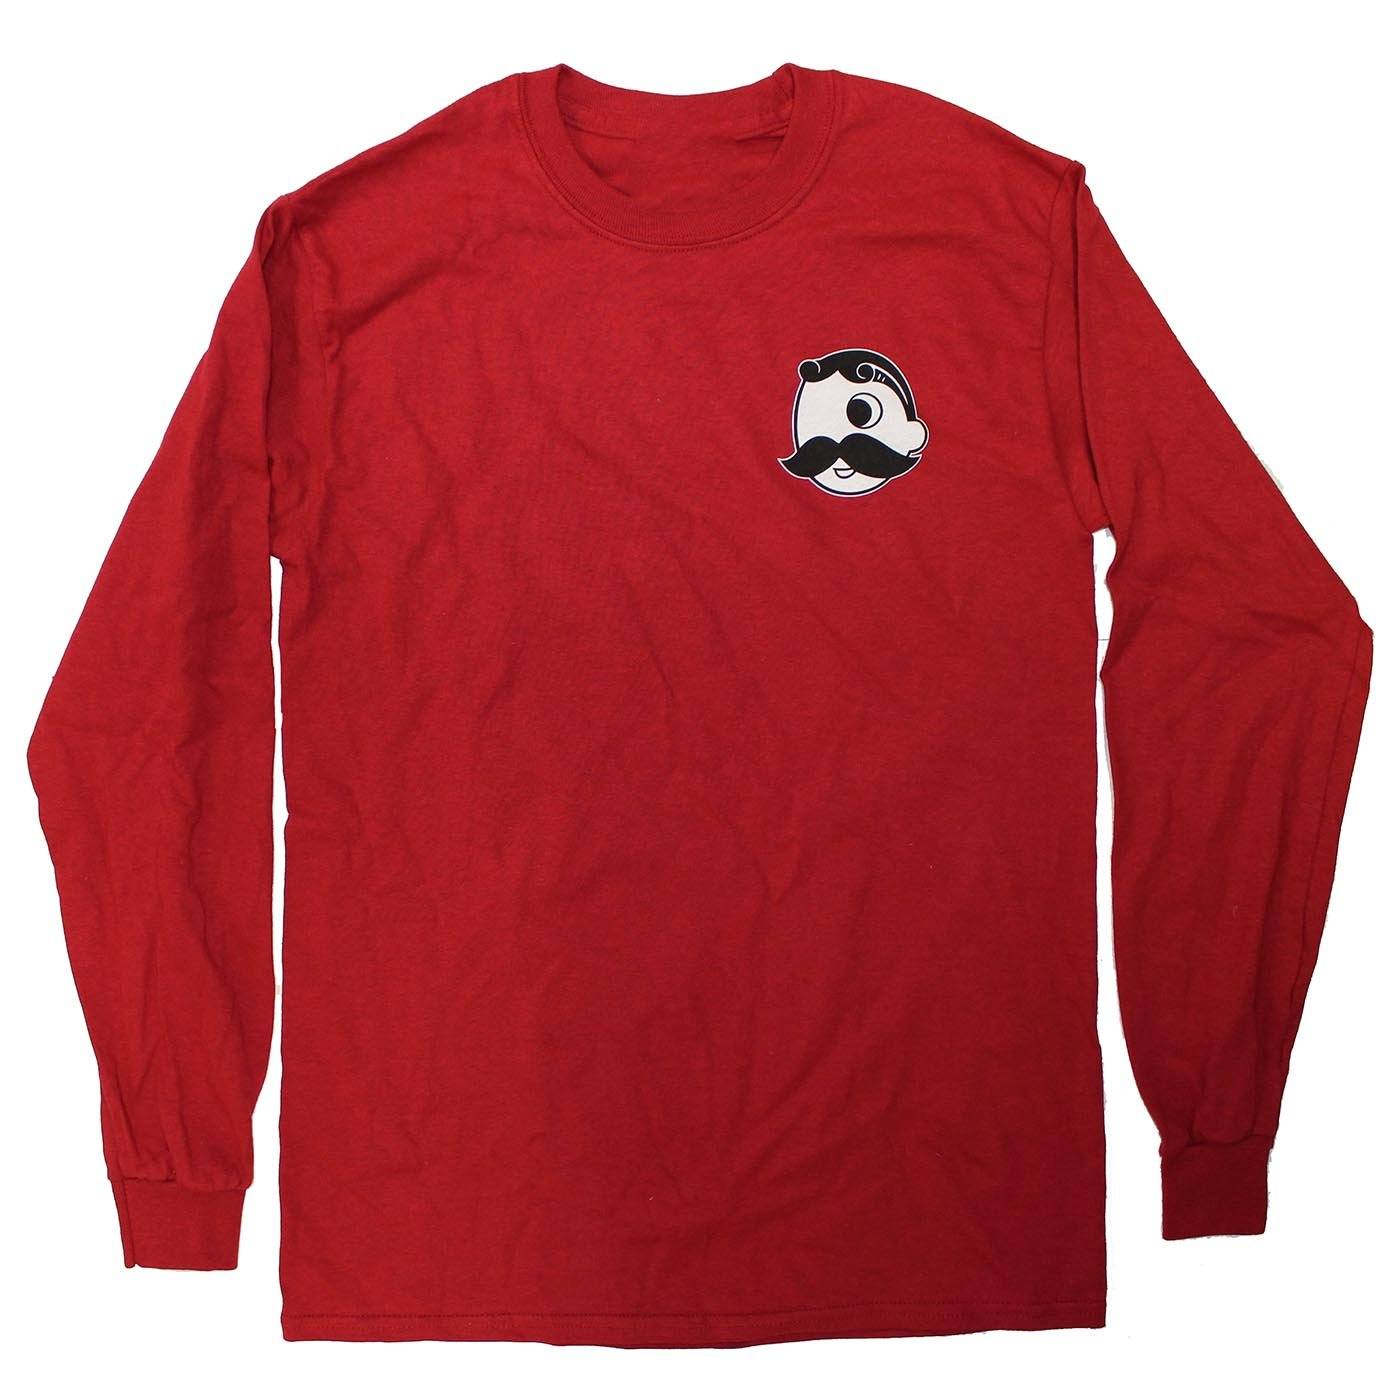 I'm Here for the Crabs & Beer (Cardinal) / Long Sleeve Shirt - Route One Apparel